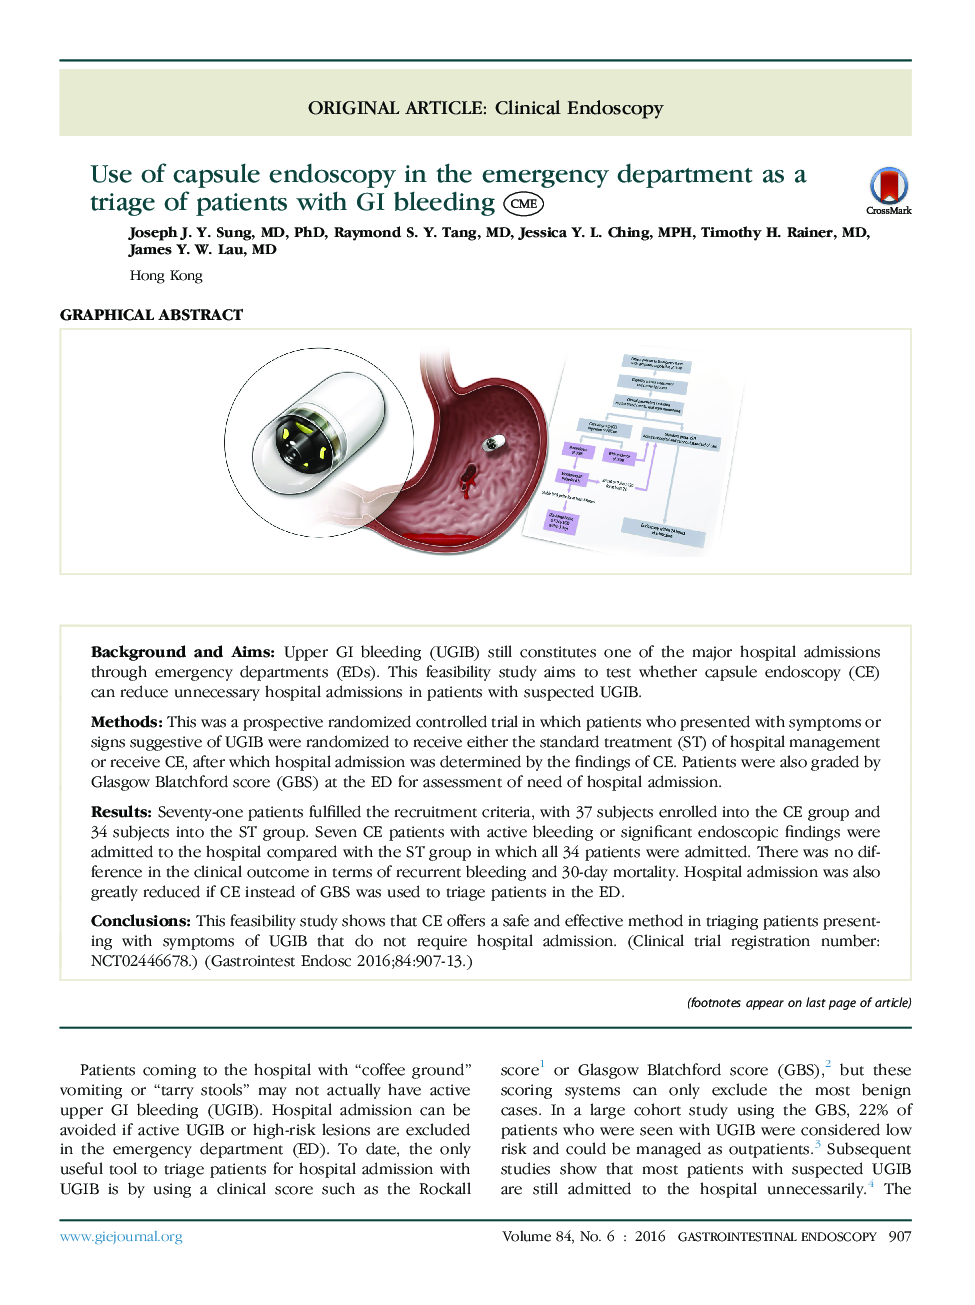 Use of capsule endoscopy in the emergency department as a triage of patients with GI bleeding